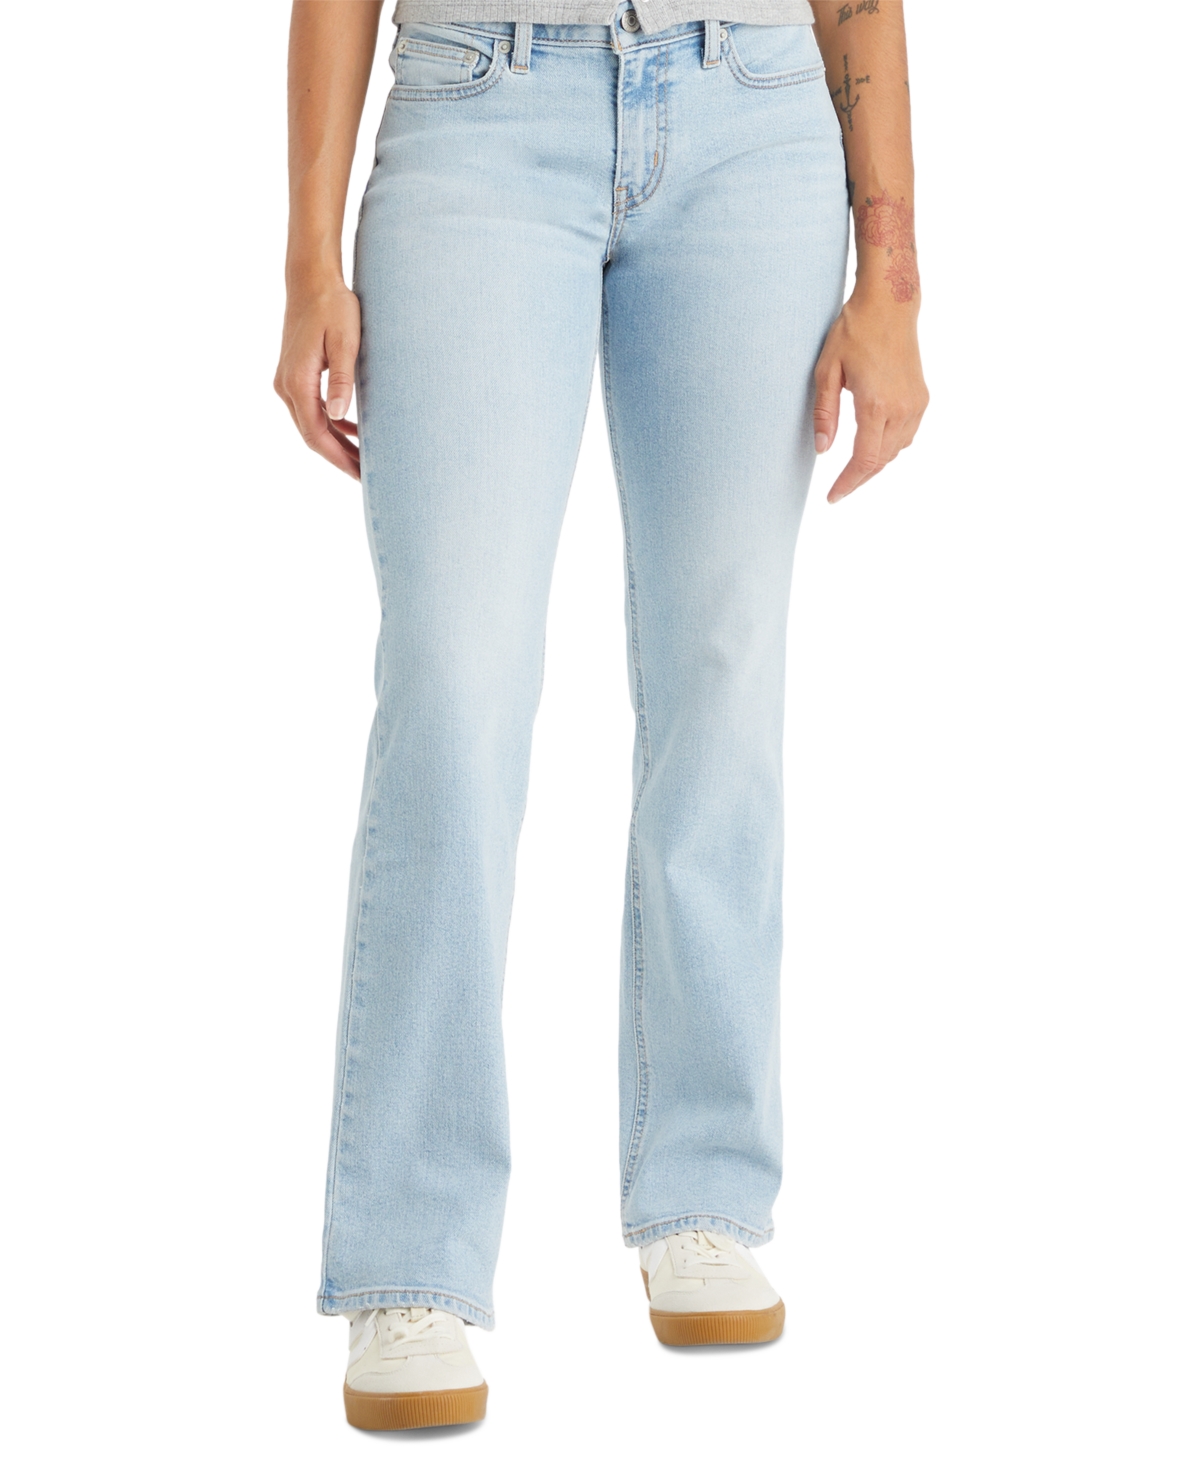 Women's Superlow Low-Rise Bootcut Jeans - All Alone